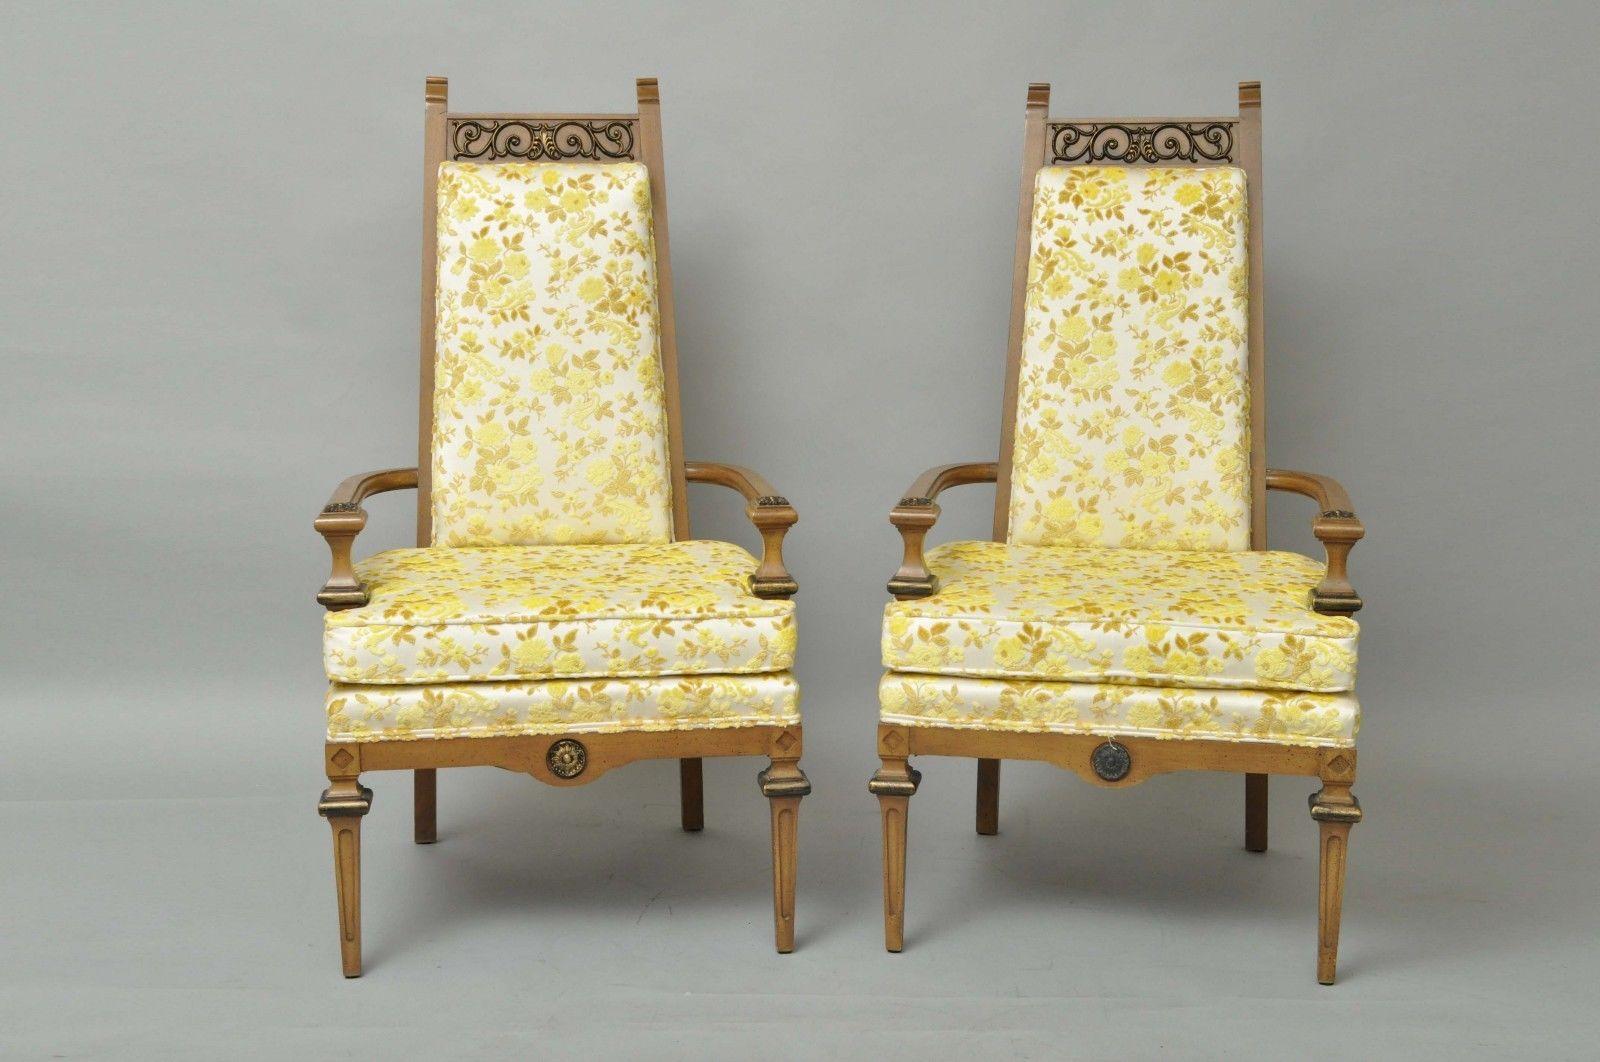 Pair of vintage Hollywood Regency high back armchairs. Item features stately solid wood frames, scrolling brass ormolu, clean lines, white and gold floral upholstery, circa mid-20th century, American. Measurements: 48.5